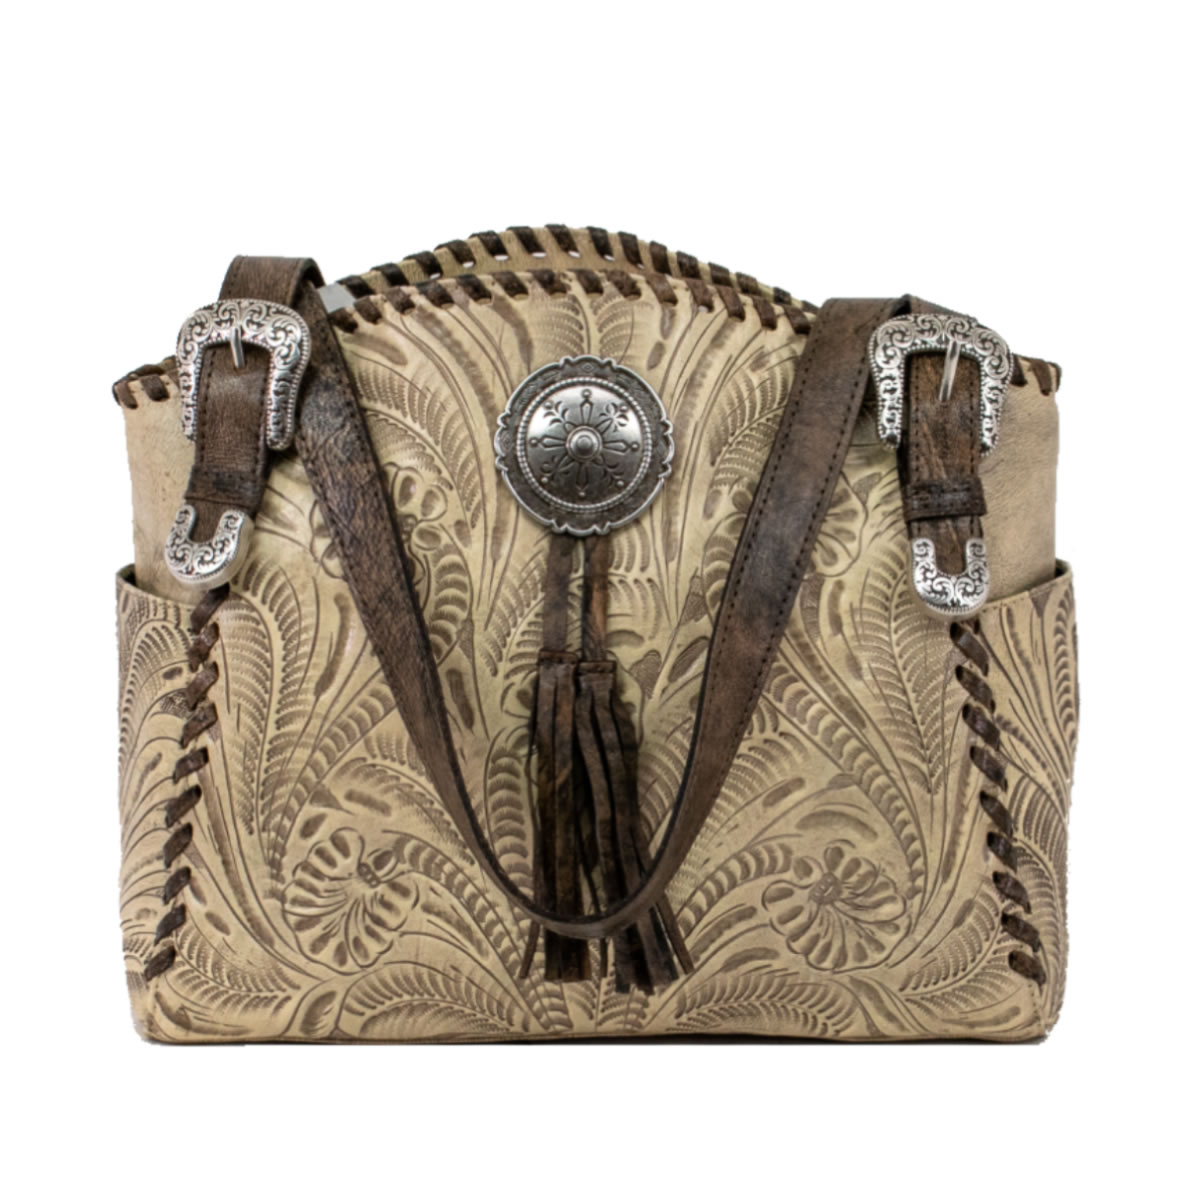 Women's Concealed Carry Purse the 